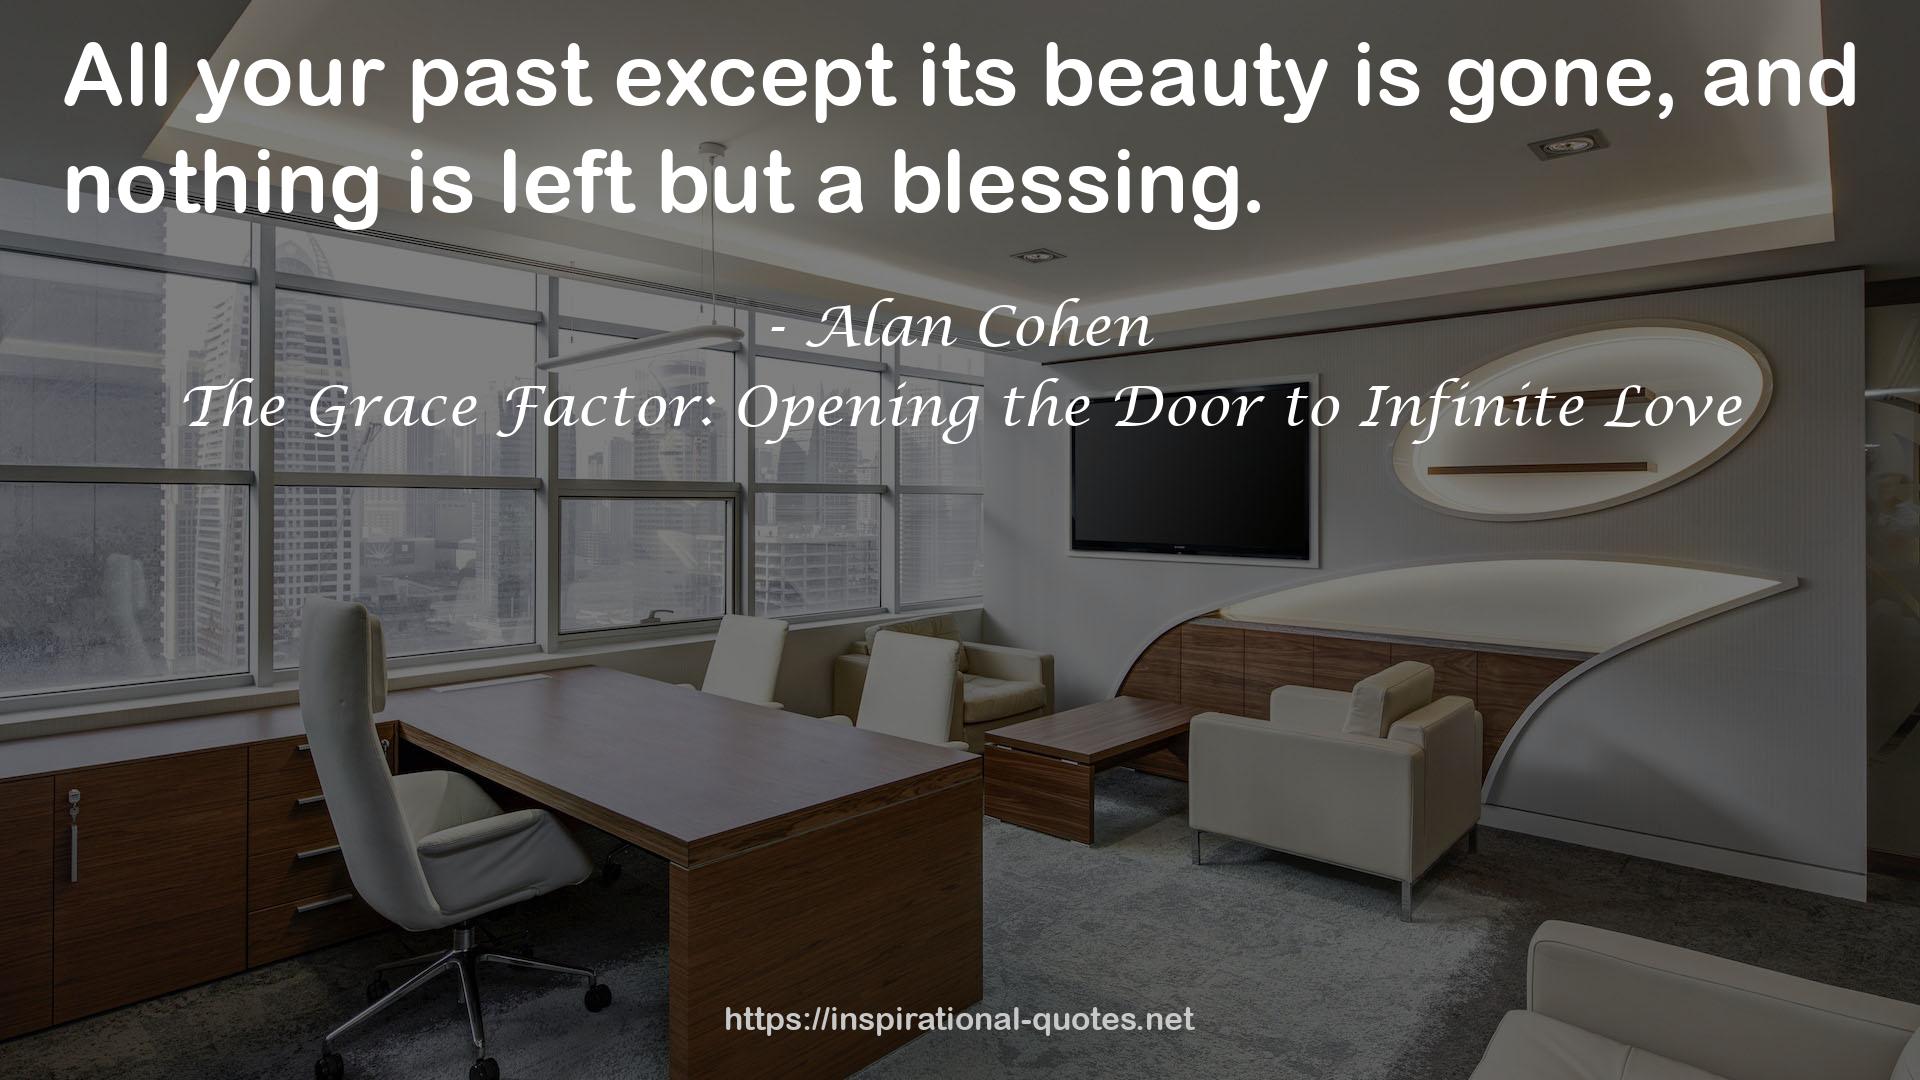 The Grace Factor: Opening the Door to Infinite Love QUOTES